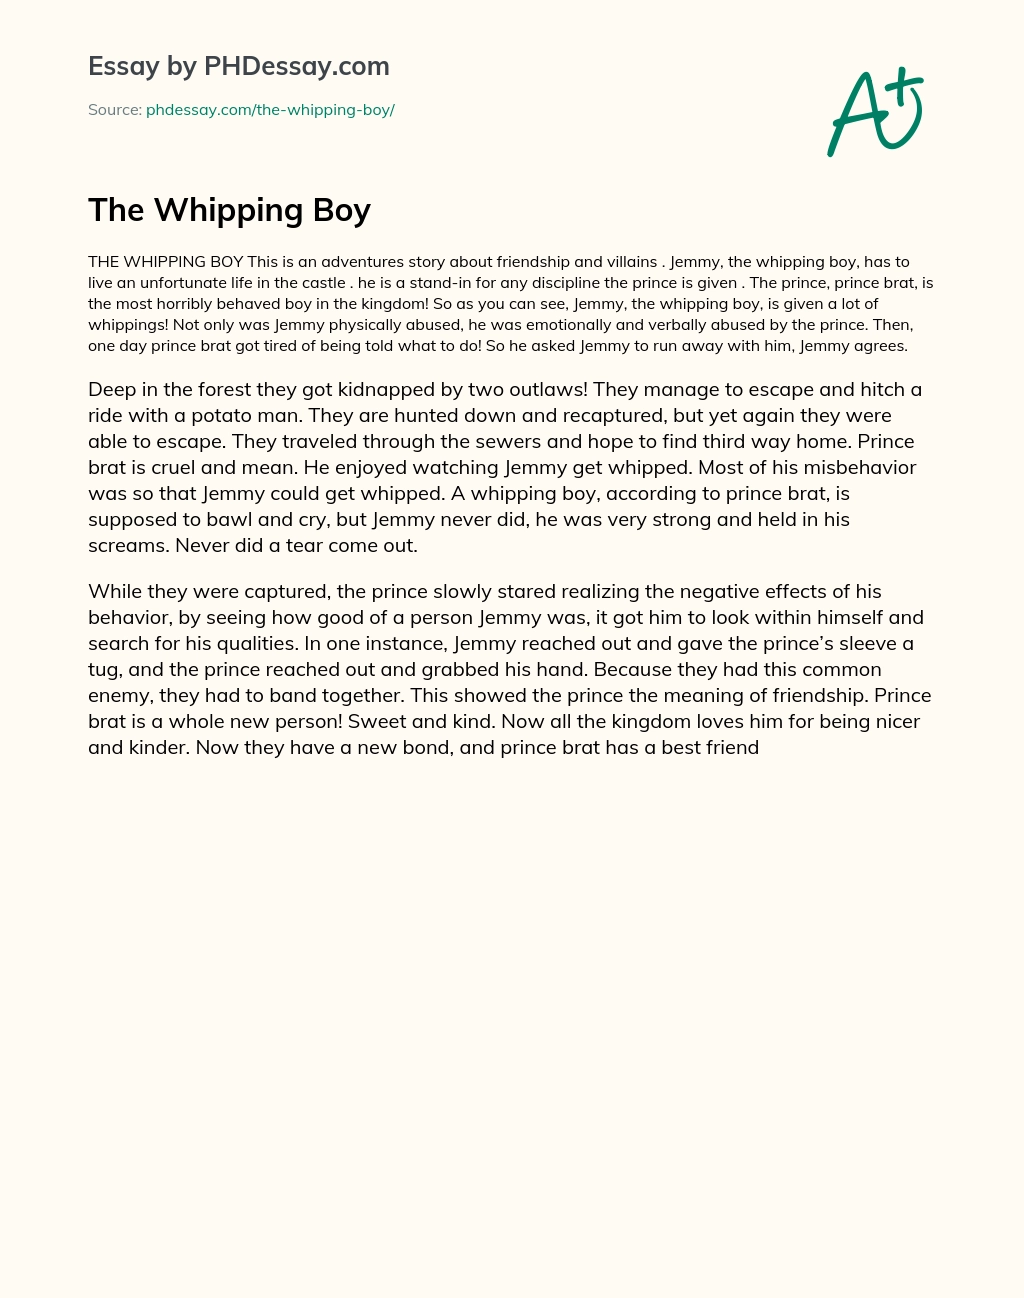 The Whipping Boy essay